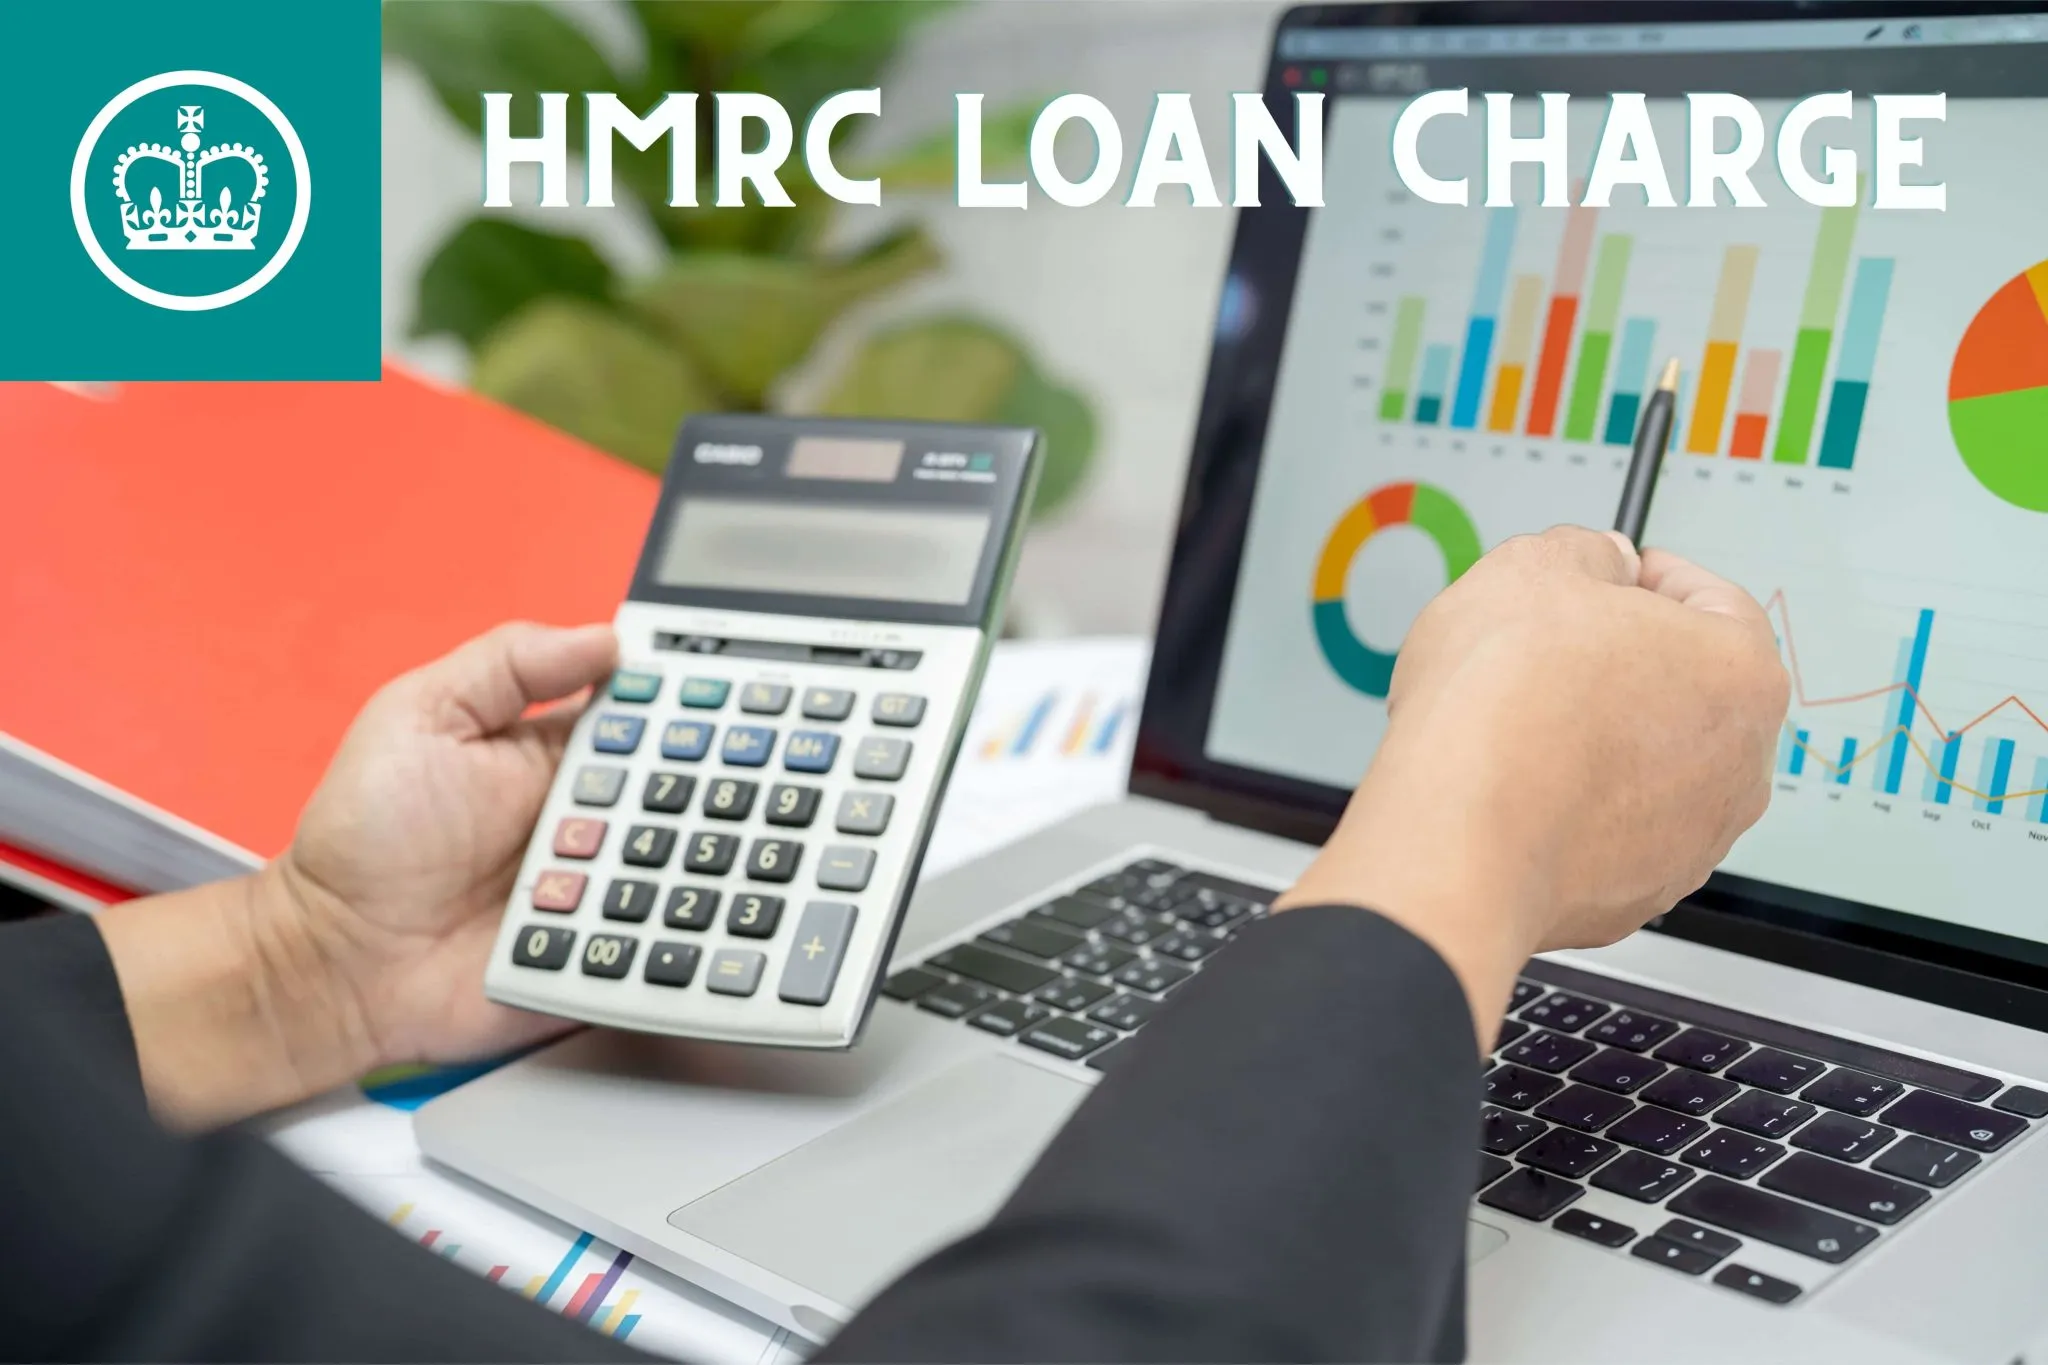 Learn about HMRC's efforts to combat disguised remuneration schemes with the introduction of the loan charge.